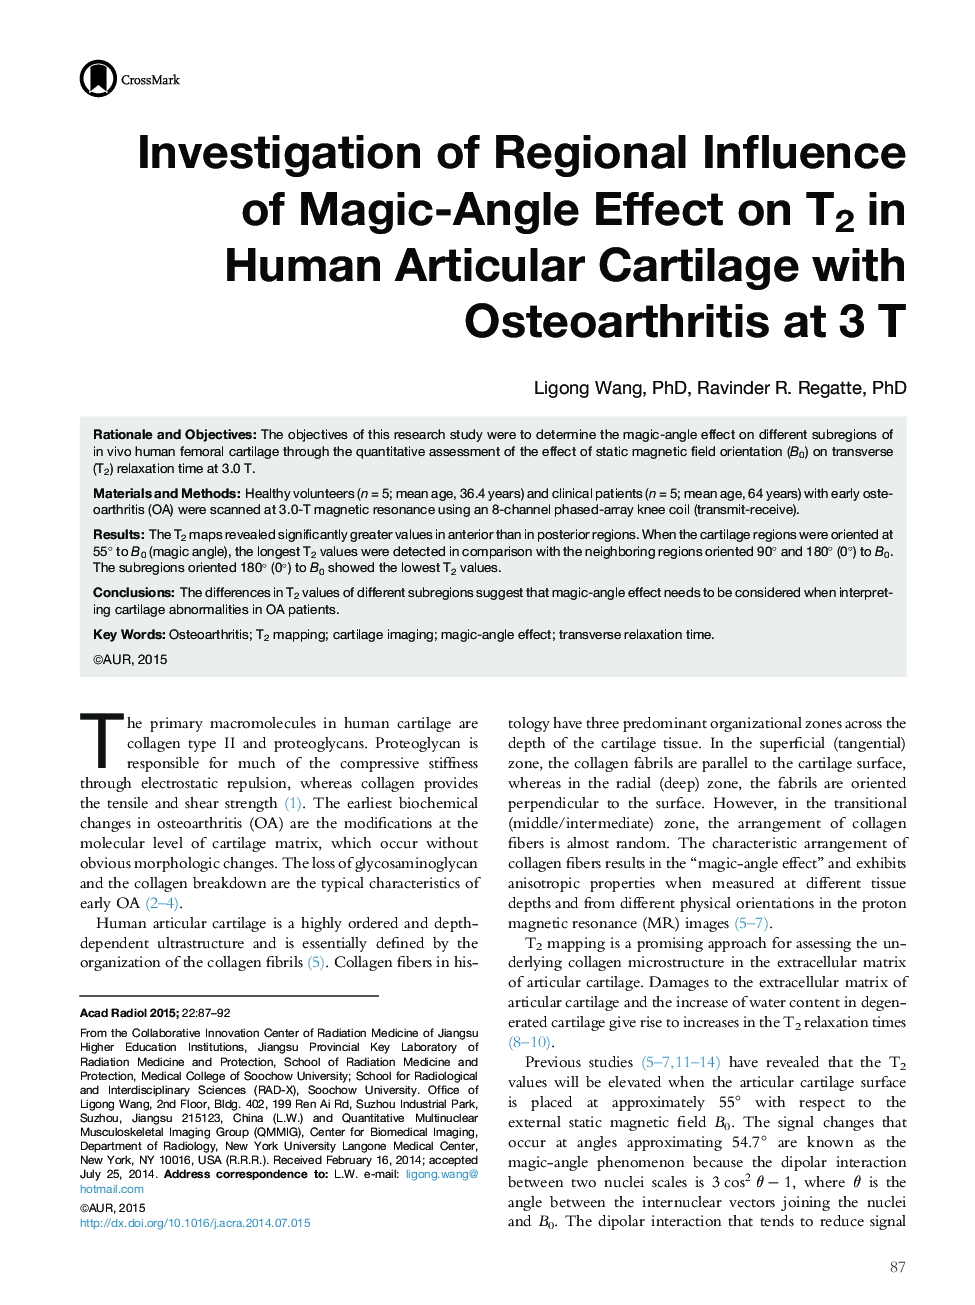 Investigation of Regional Influence of Magic-Angle Effect on T2 in Human Articular Cartilage with Osteoarthritis at 3 T